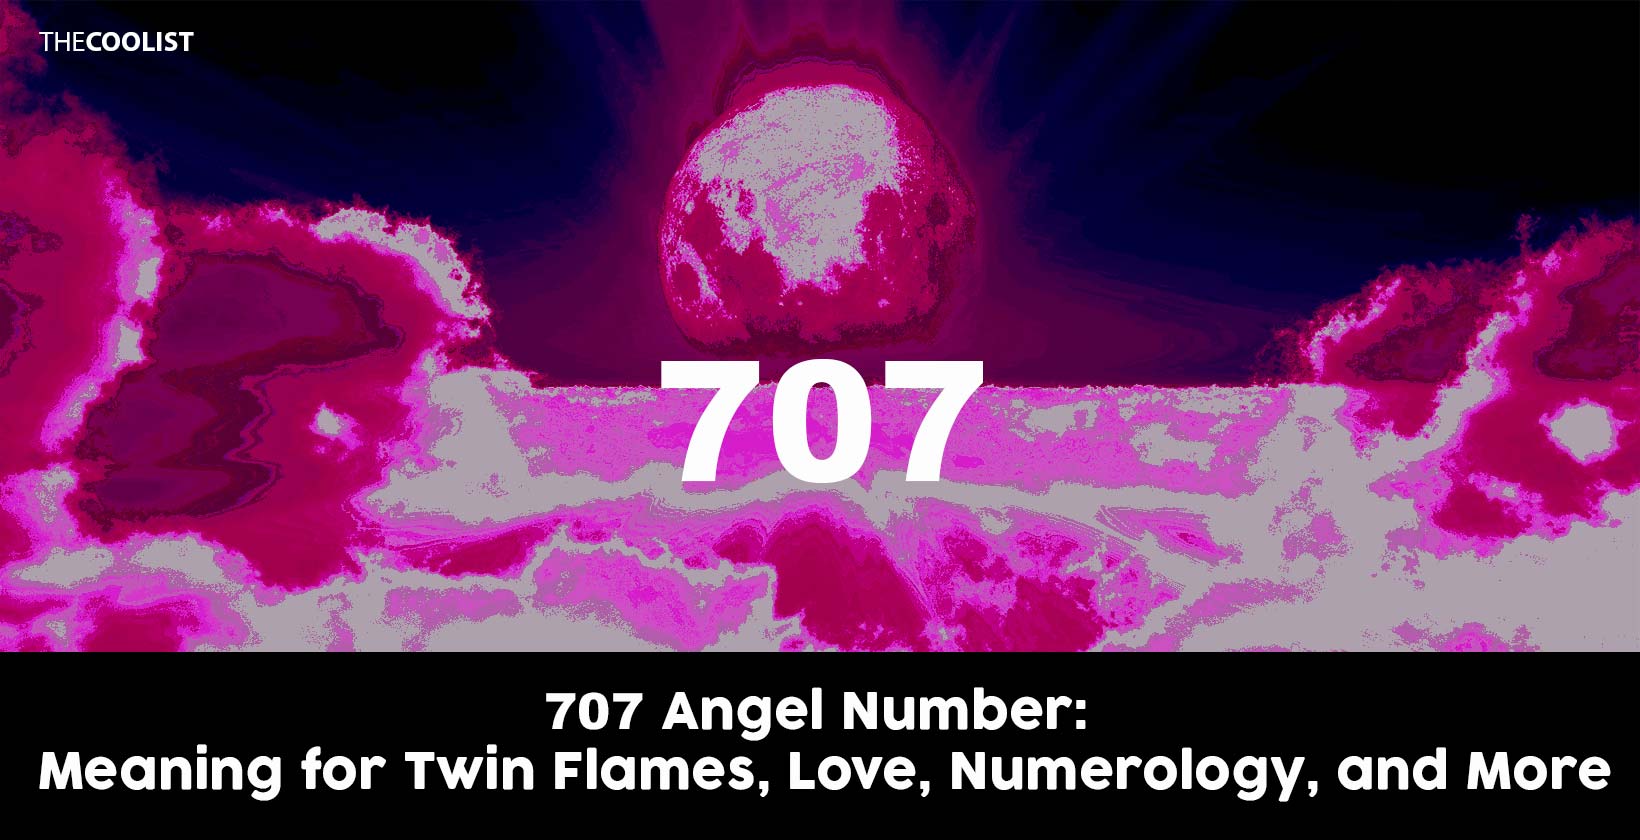 707 Angel Number: Meaning for Twin Flames, Love, Numerology, and More